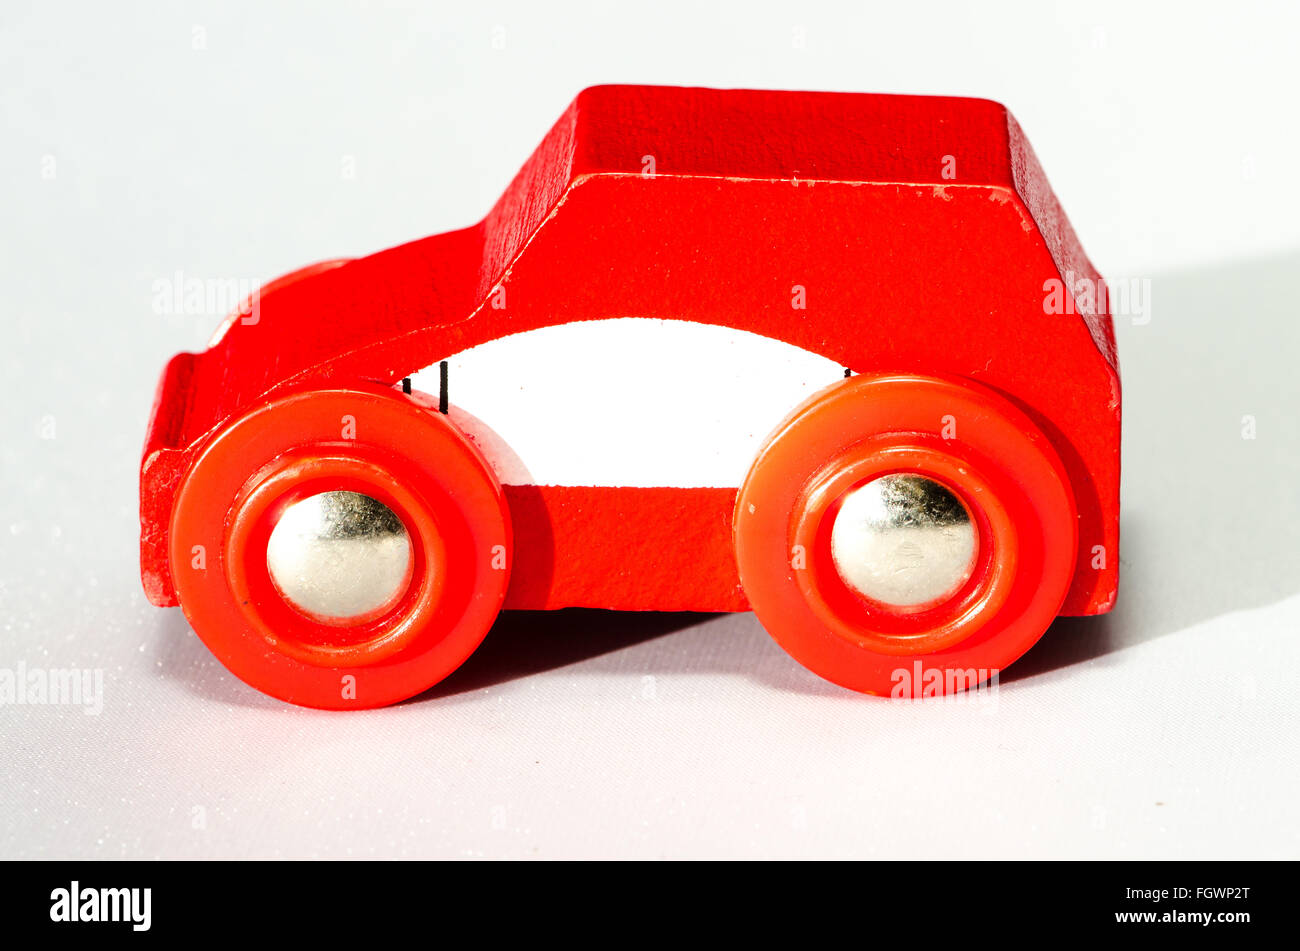 wooden red car image isolated Stock Photo